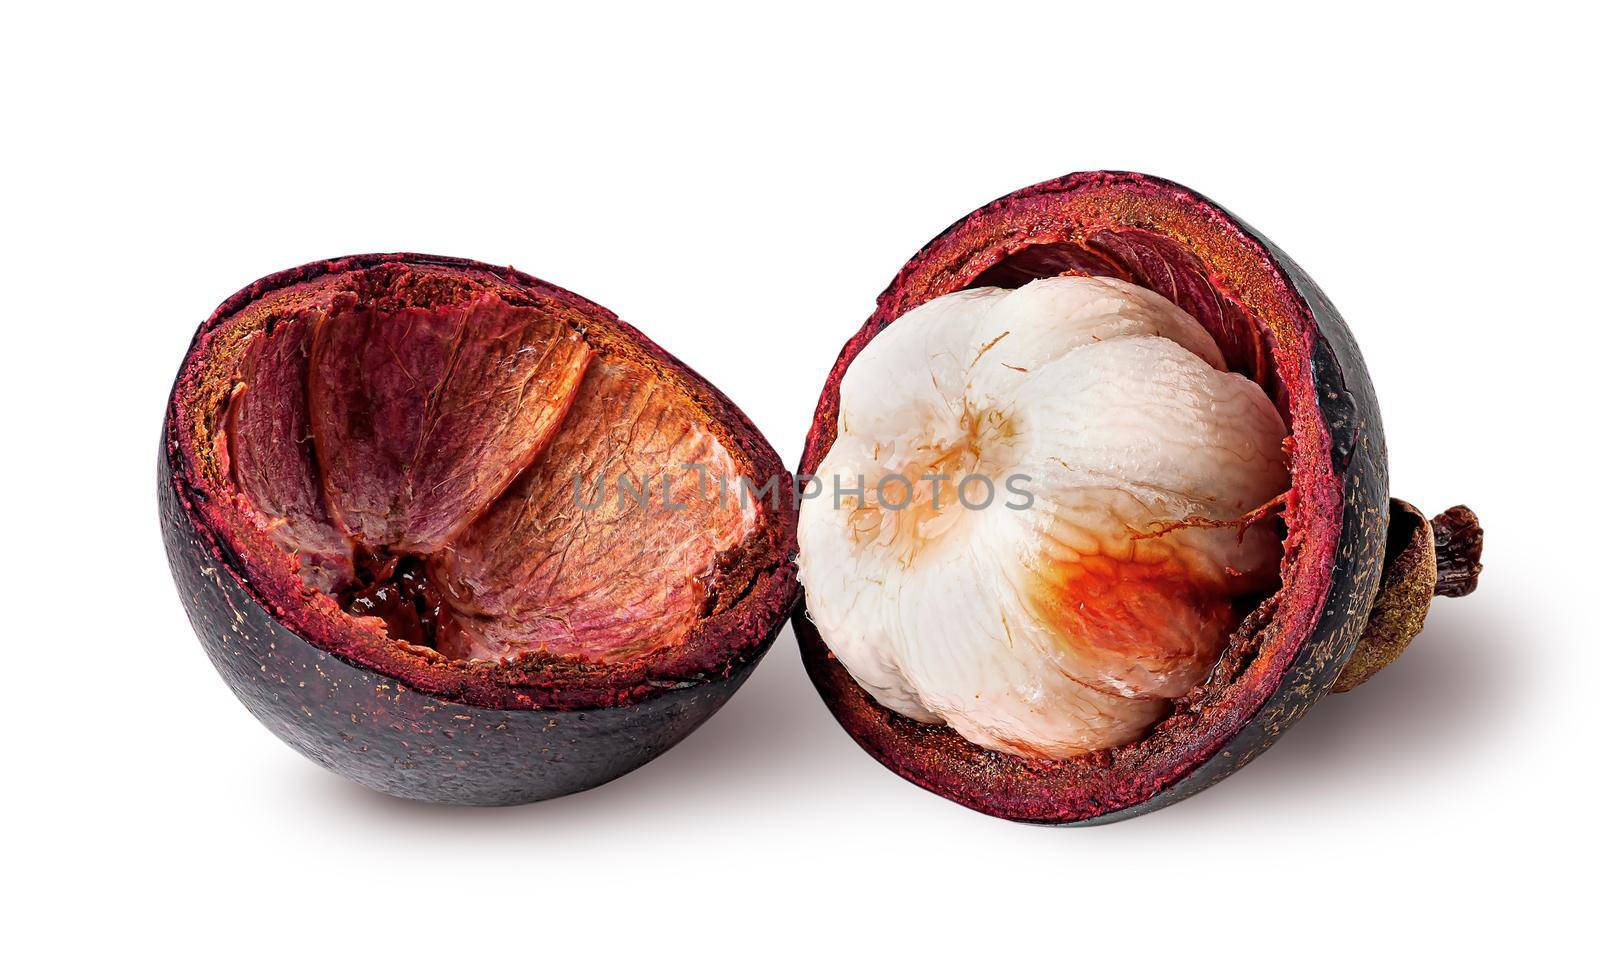 Opened mangosteen and shells near isolated on white by Cipariss